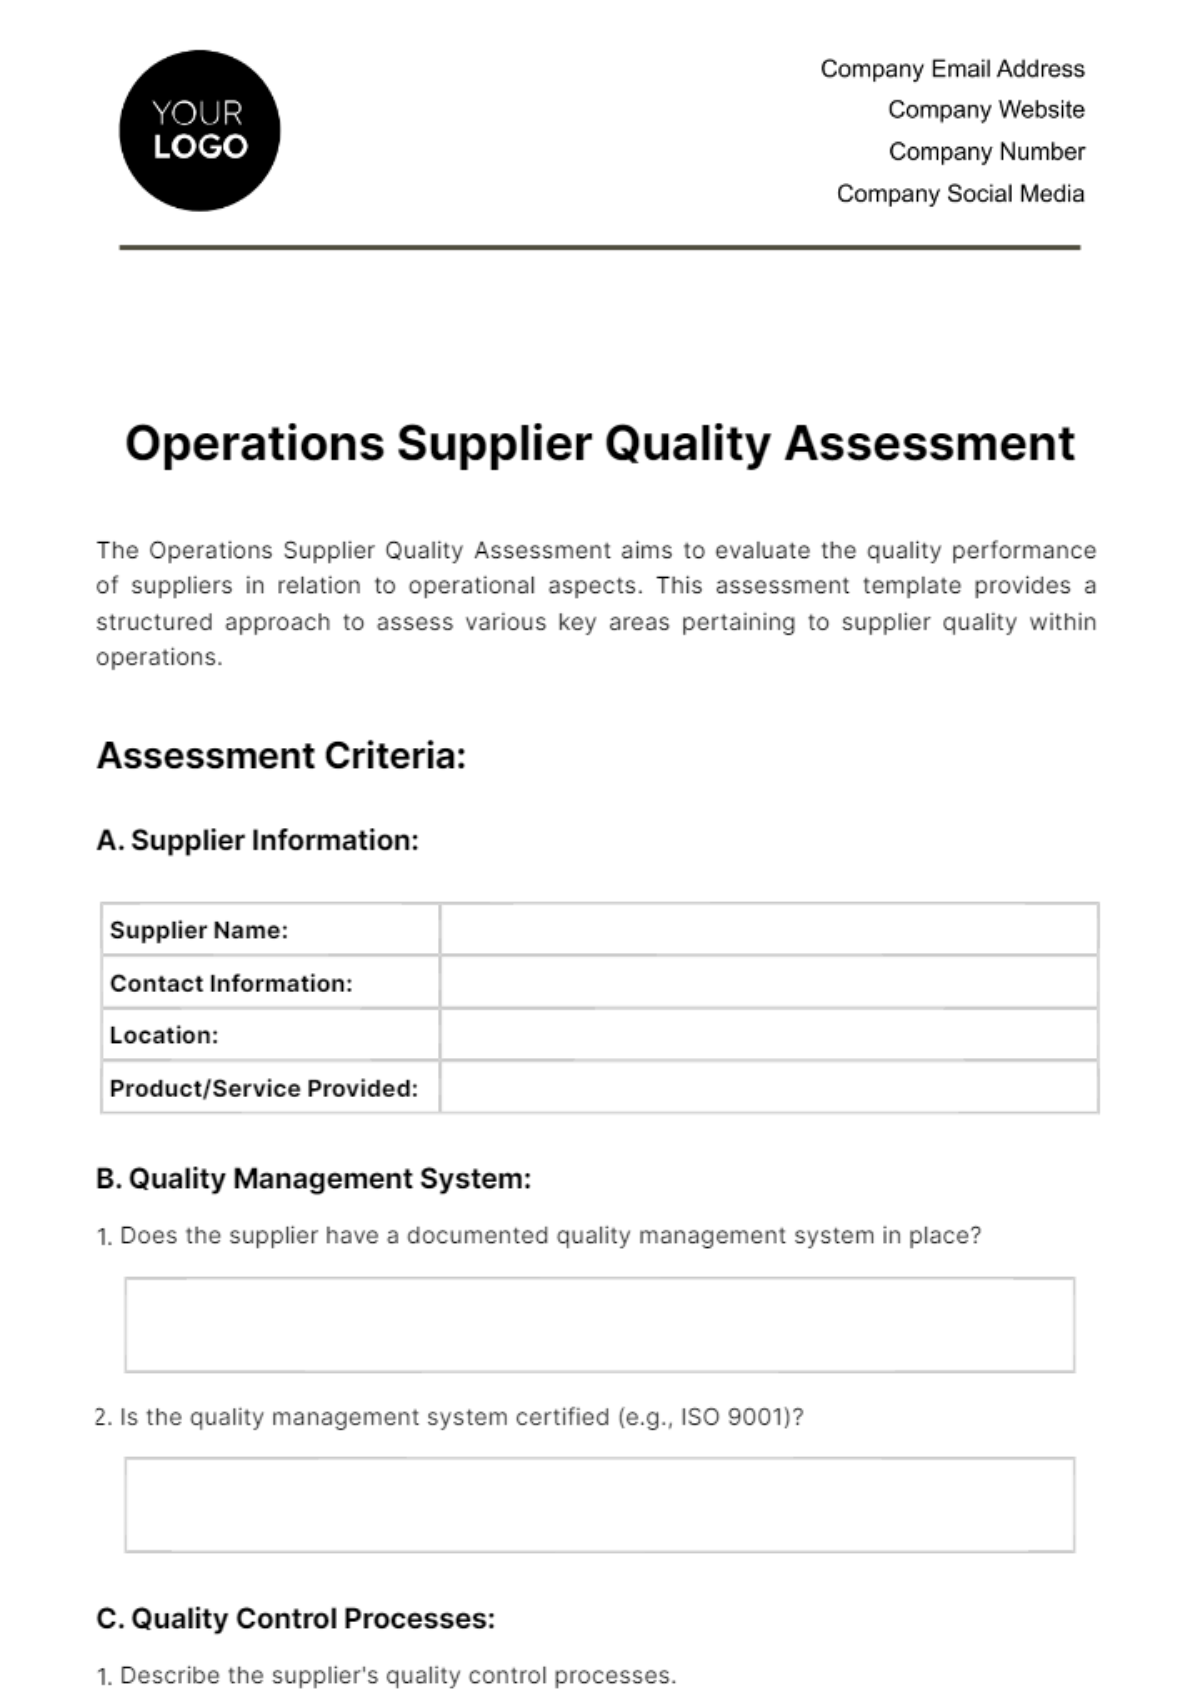 Operations Supplier Quality Assessment Template